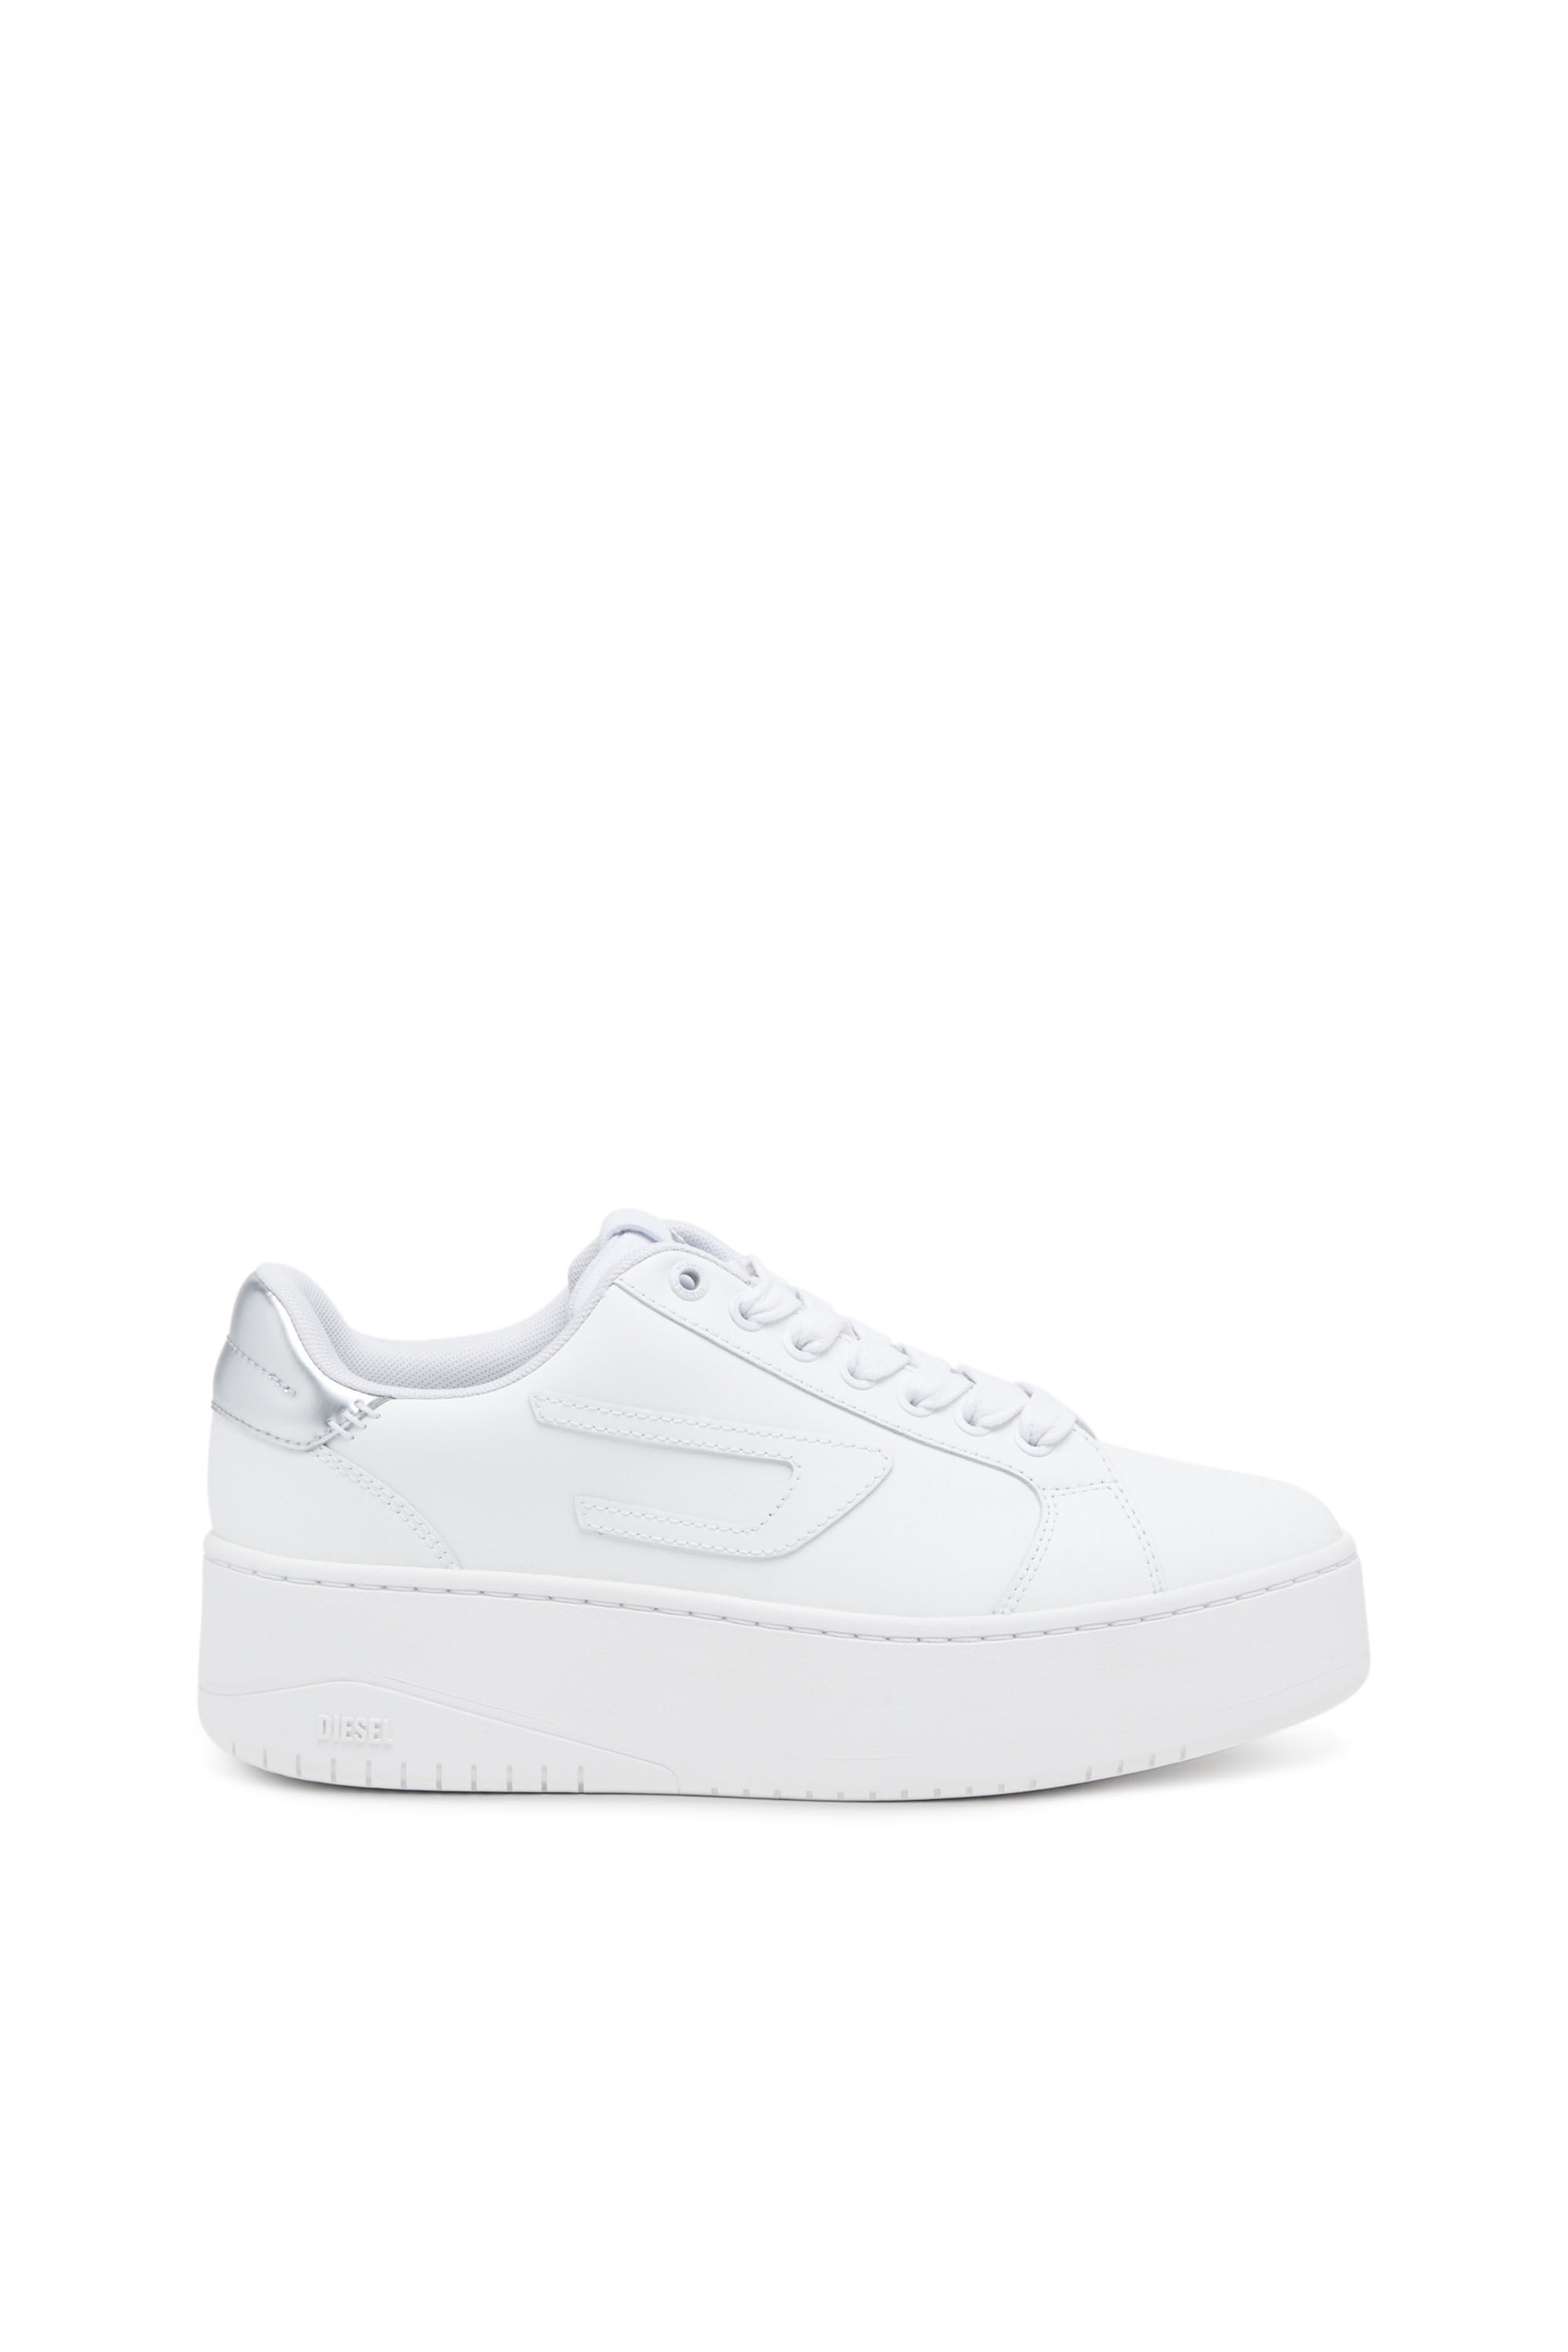 Diesel - S-ATHENE BOLD W, Woman S-Athene Bold-Low-top sneakers with flatform sole in White - Image 1